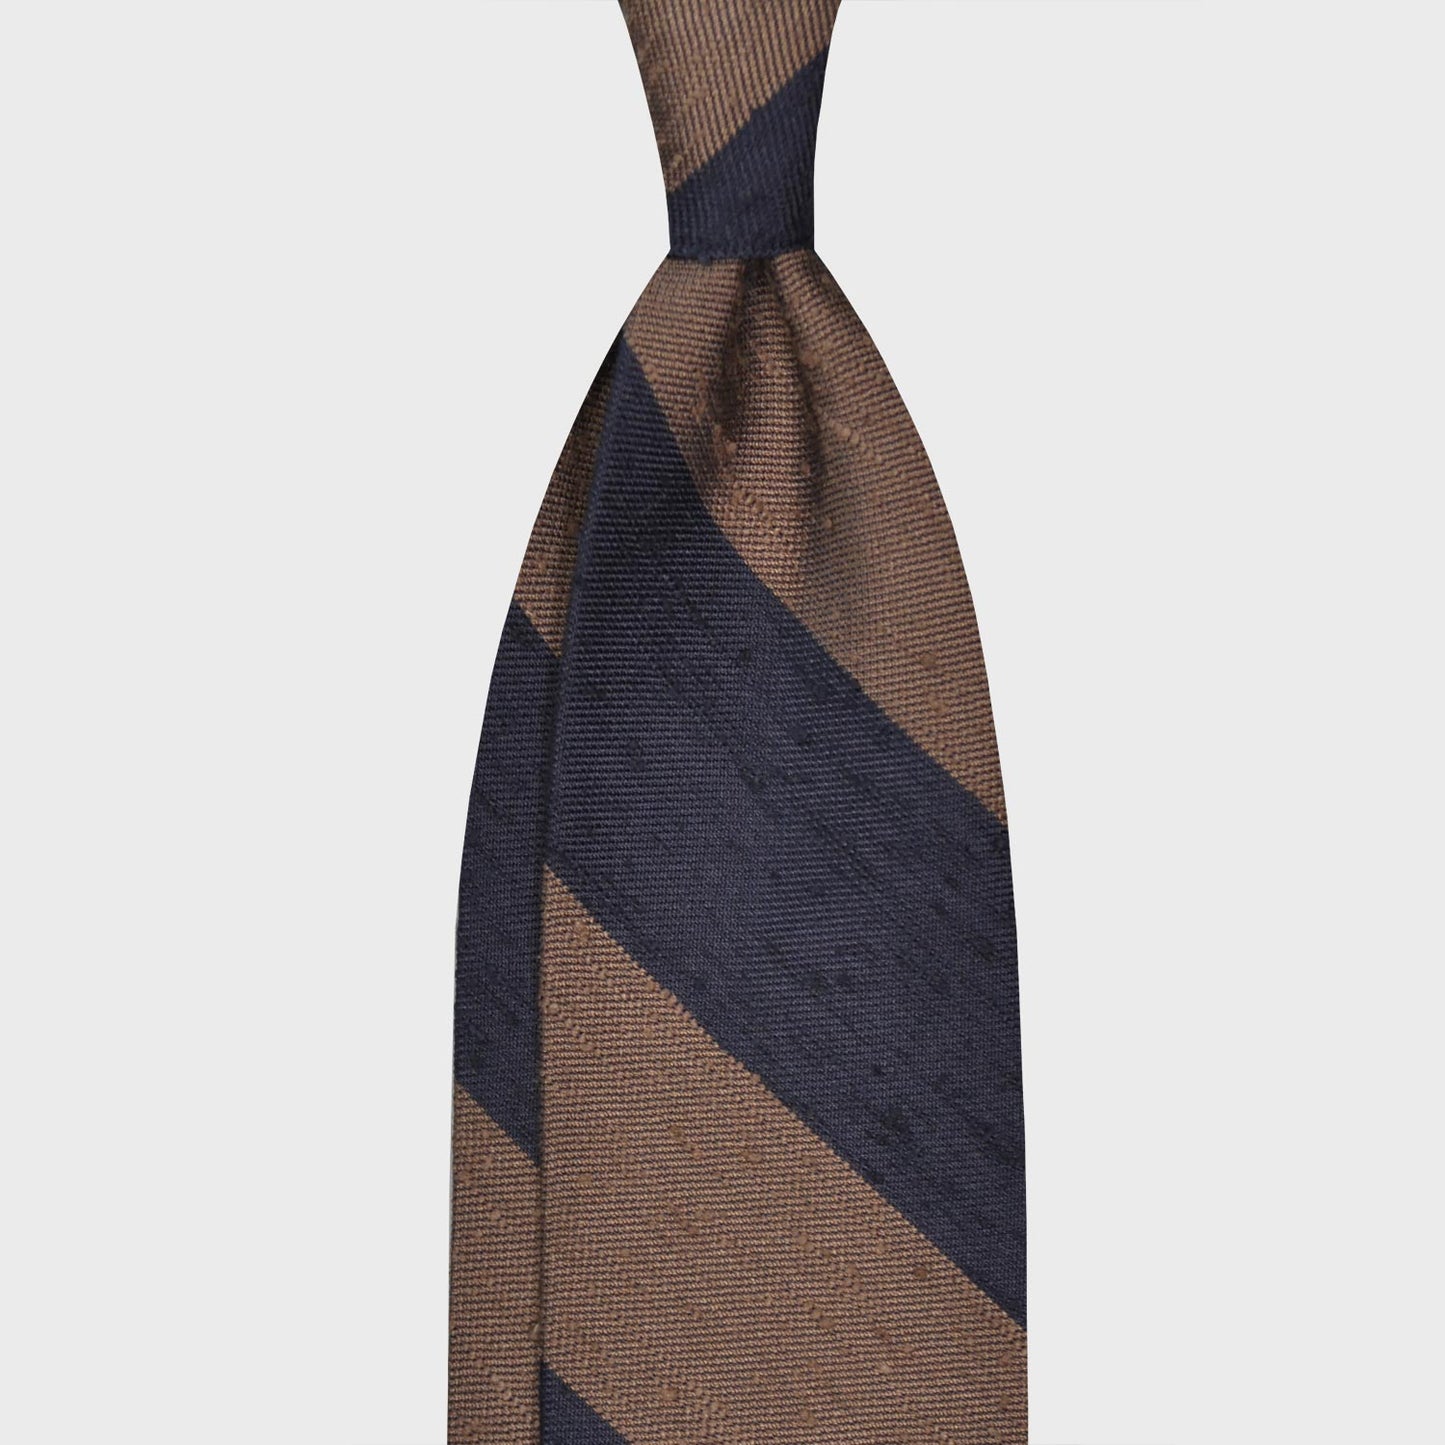 Load image into Gallery viewer, Dark Taupe Shantung Silk Tie Regimental Wide Striped. Formal shantung tie with wide striped navy blue and dark taupe, ideal for refined outfits four seasons, handmade in Italy by F.Marino exclusive for Wools Boutique Uomo, unlined tie 3 folds with hand rolled edge.
